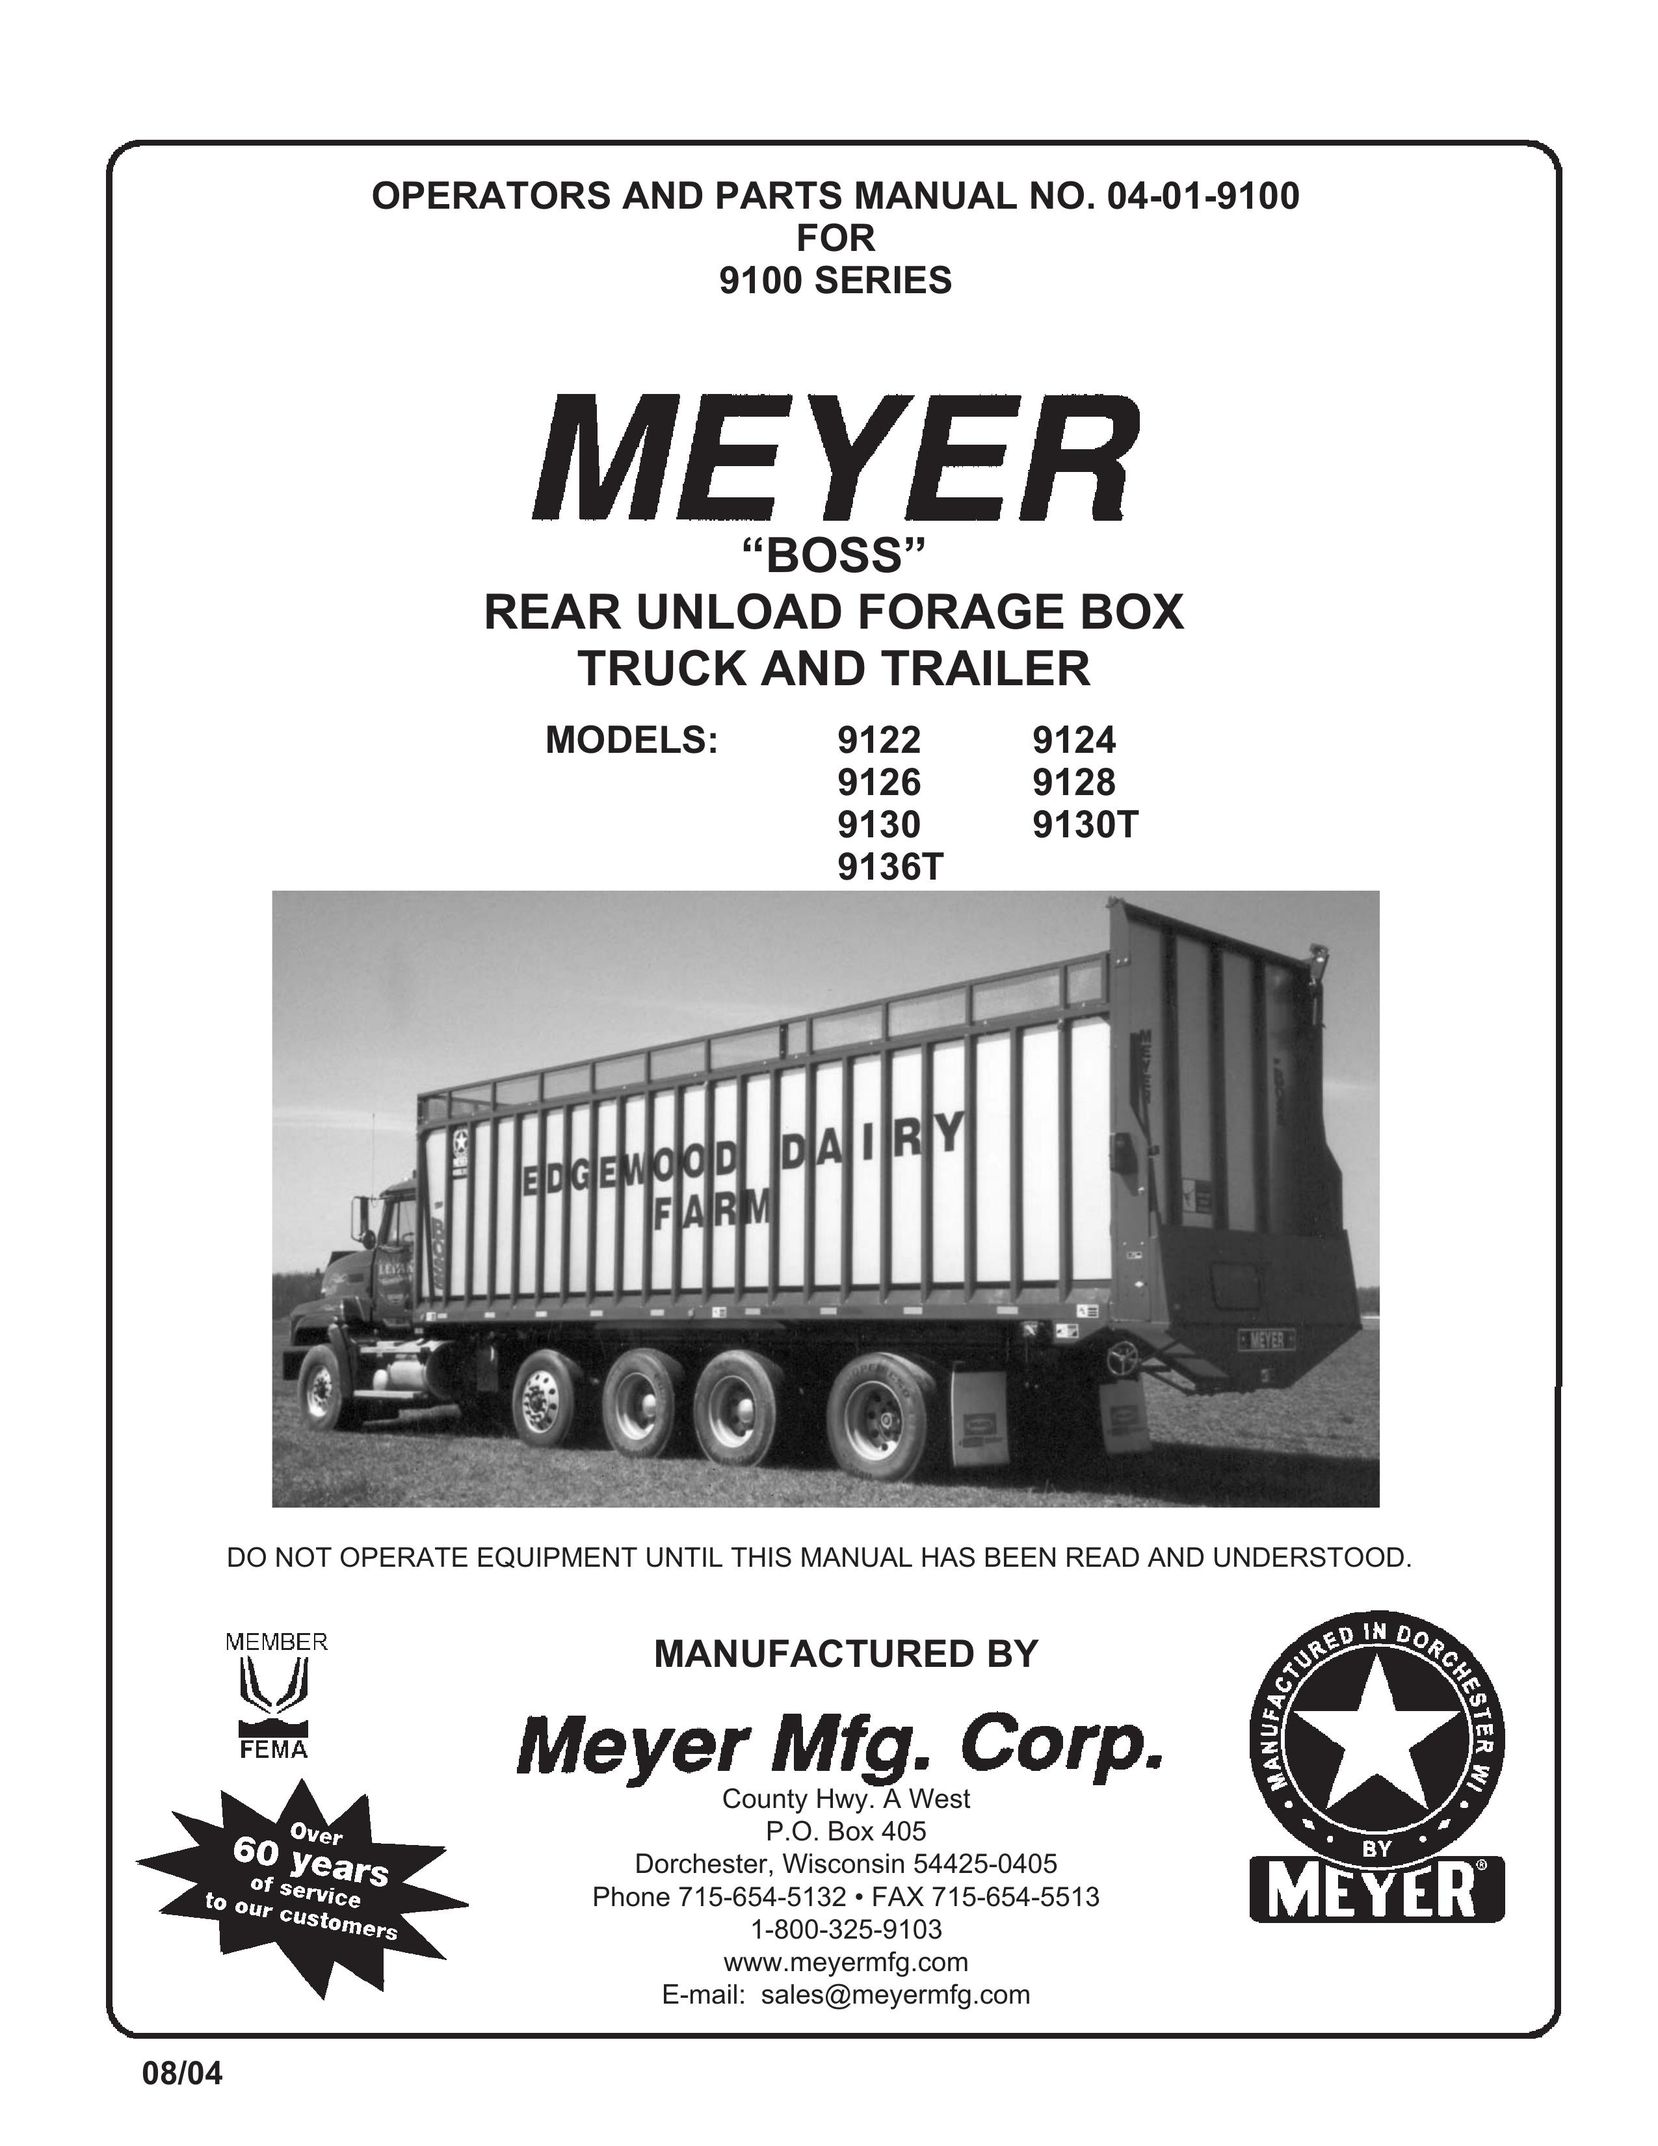 Meyer 9130T Musical Toy Instrument User Manual